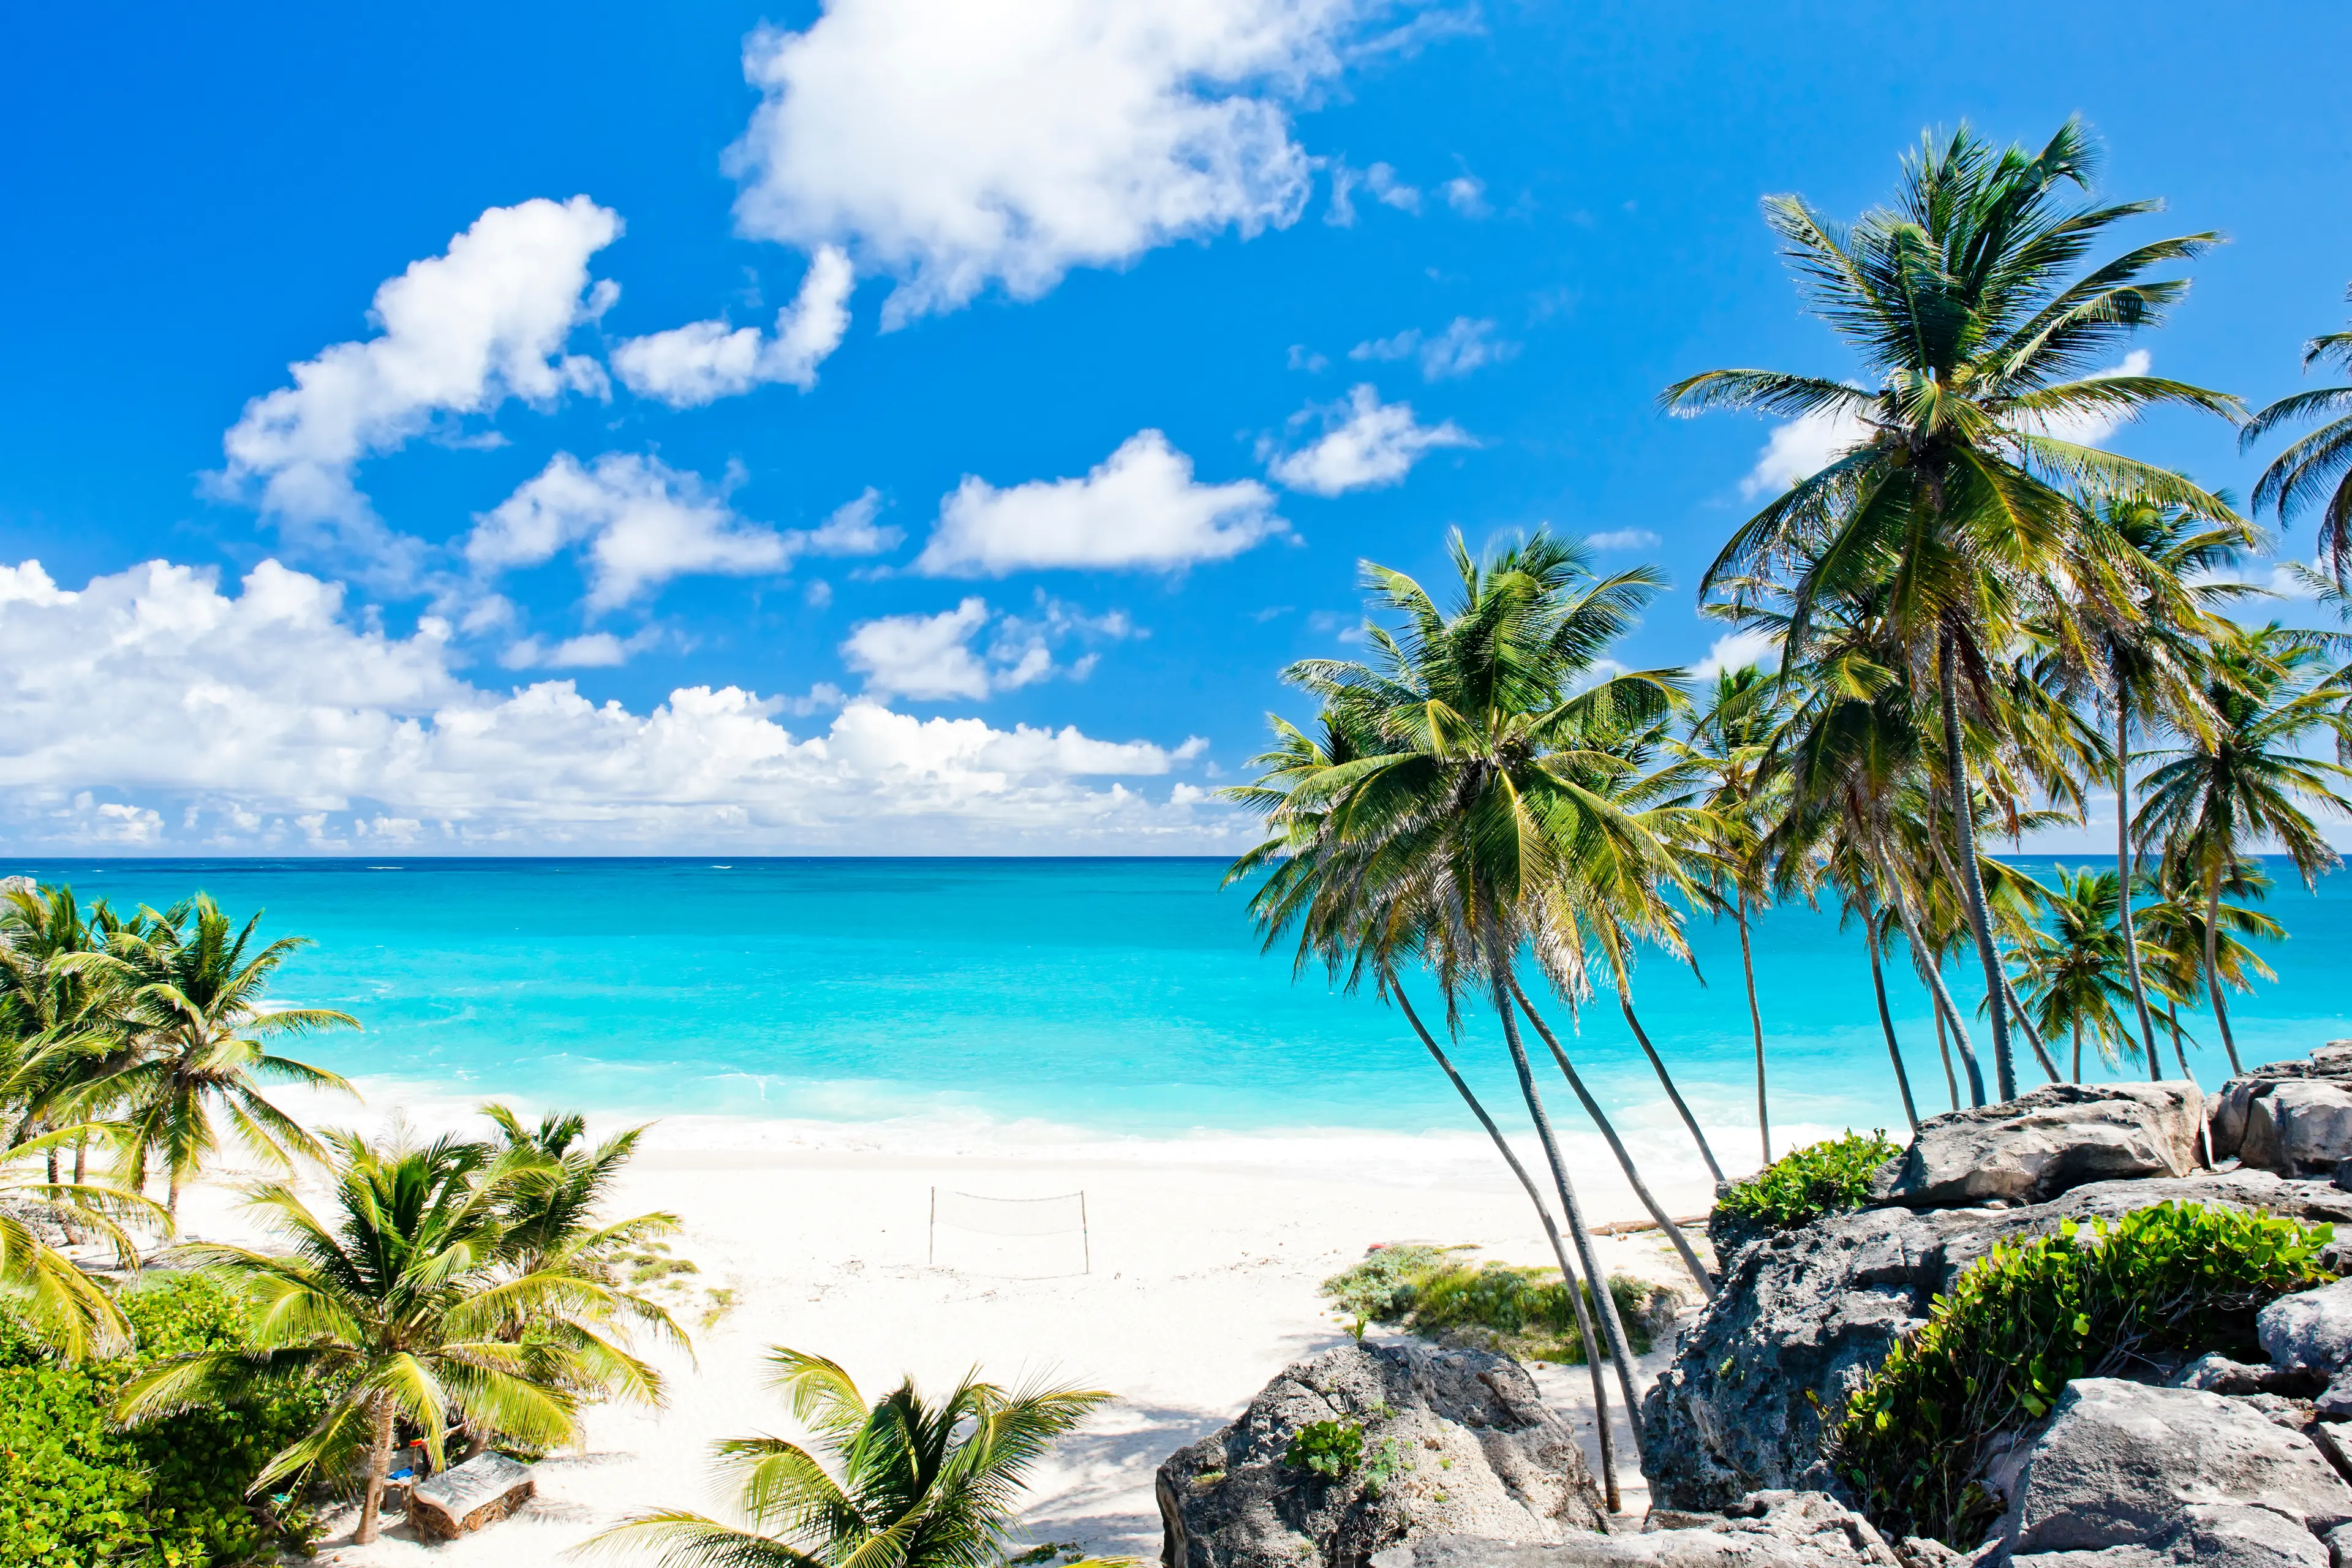 4-Day Solo Barbados Journey: Shopping, Relaxation, & Nightlife for Locals